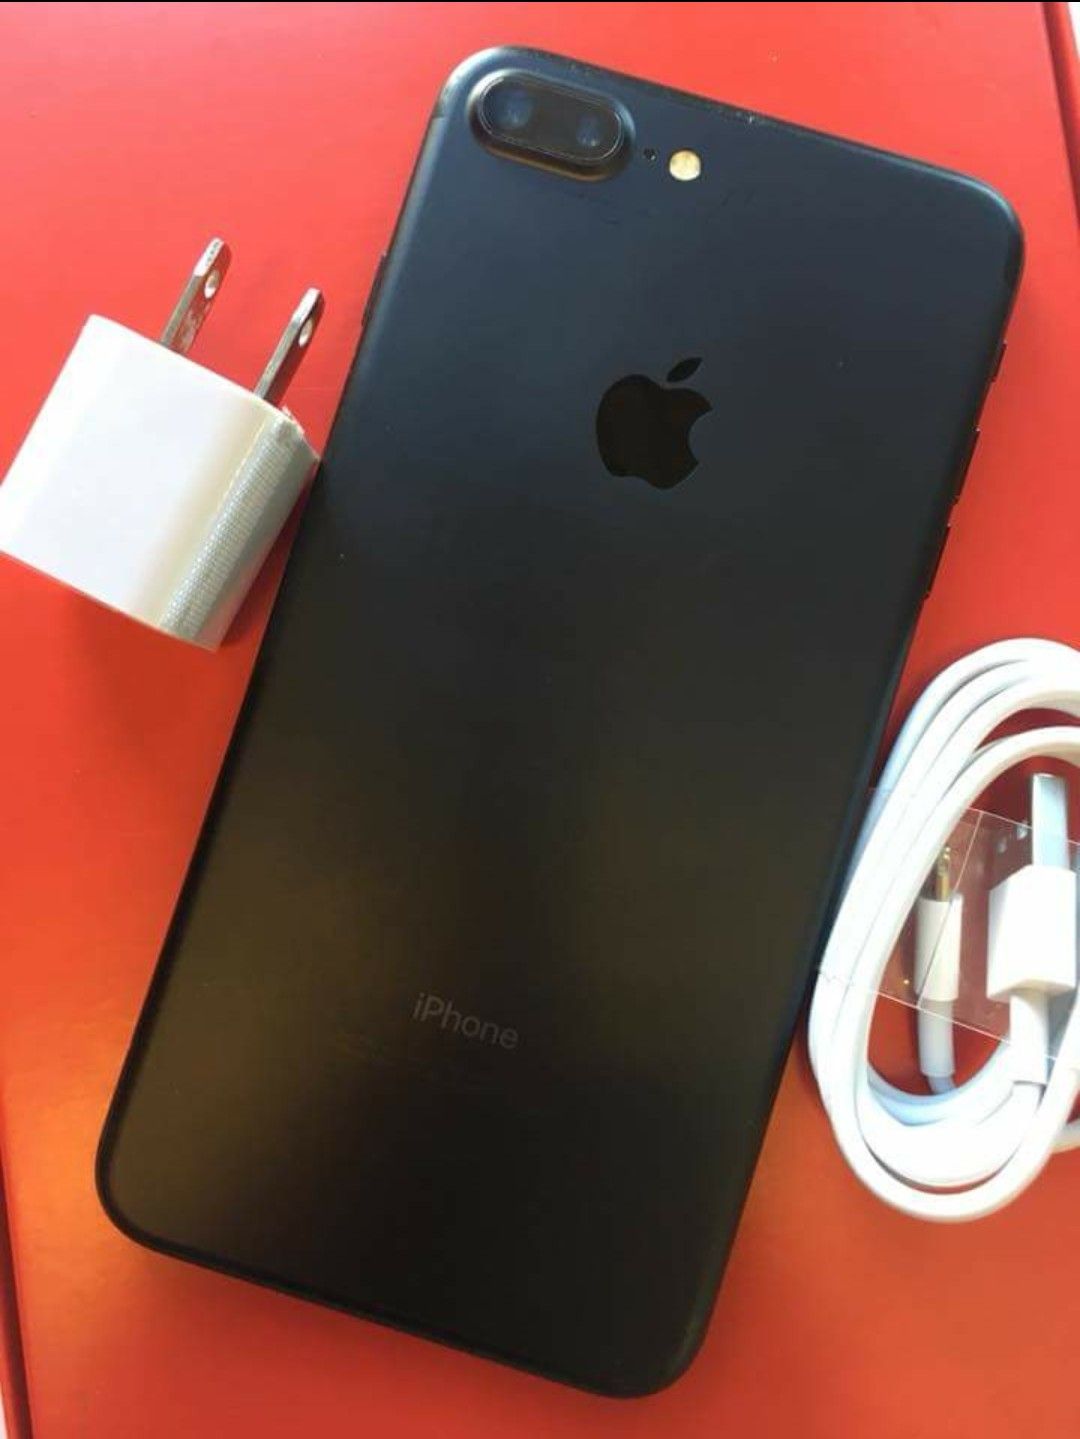 iPhone 7 Plus 32GB. Factory Unlocked and Usable with Any Company Carrier SIM Any Country